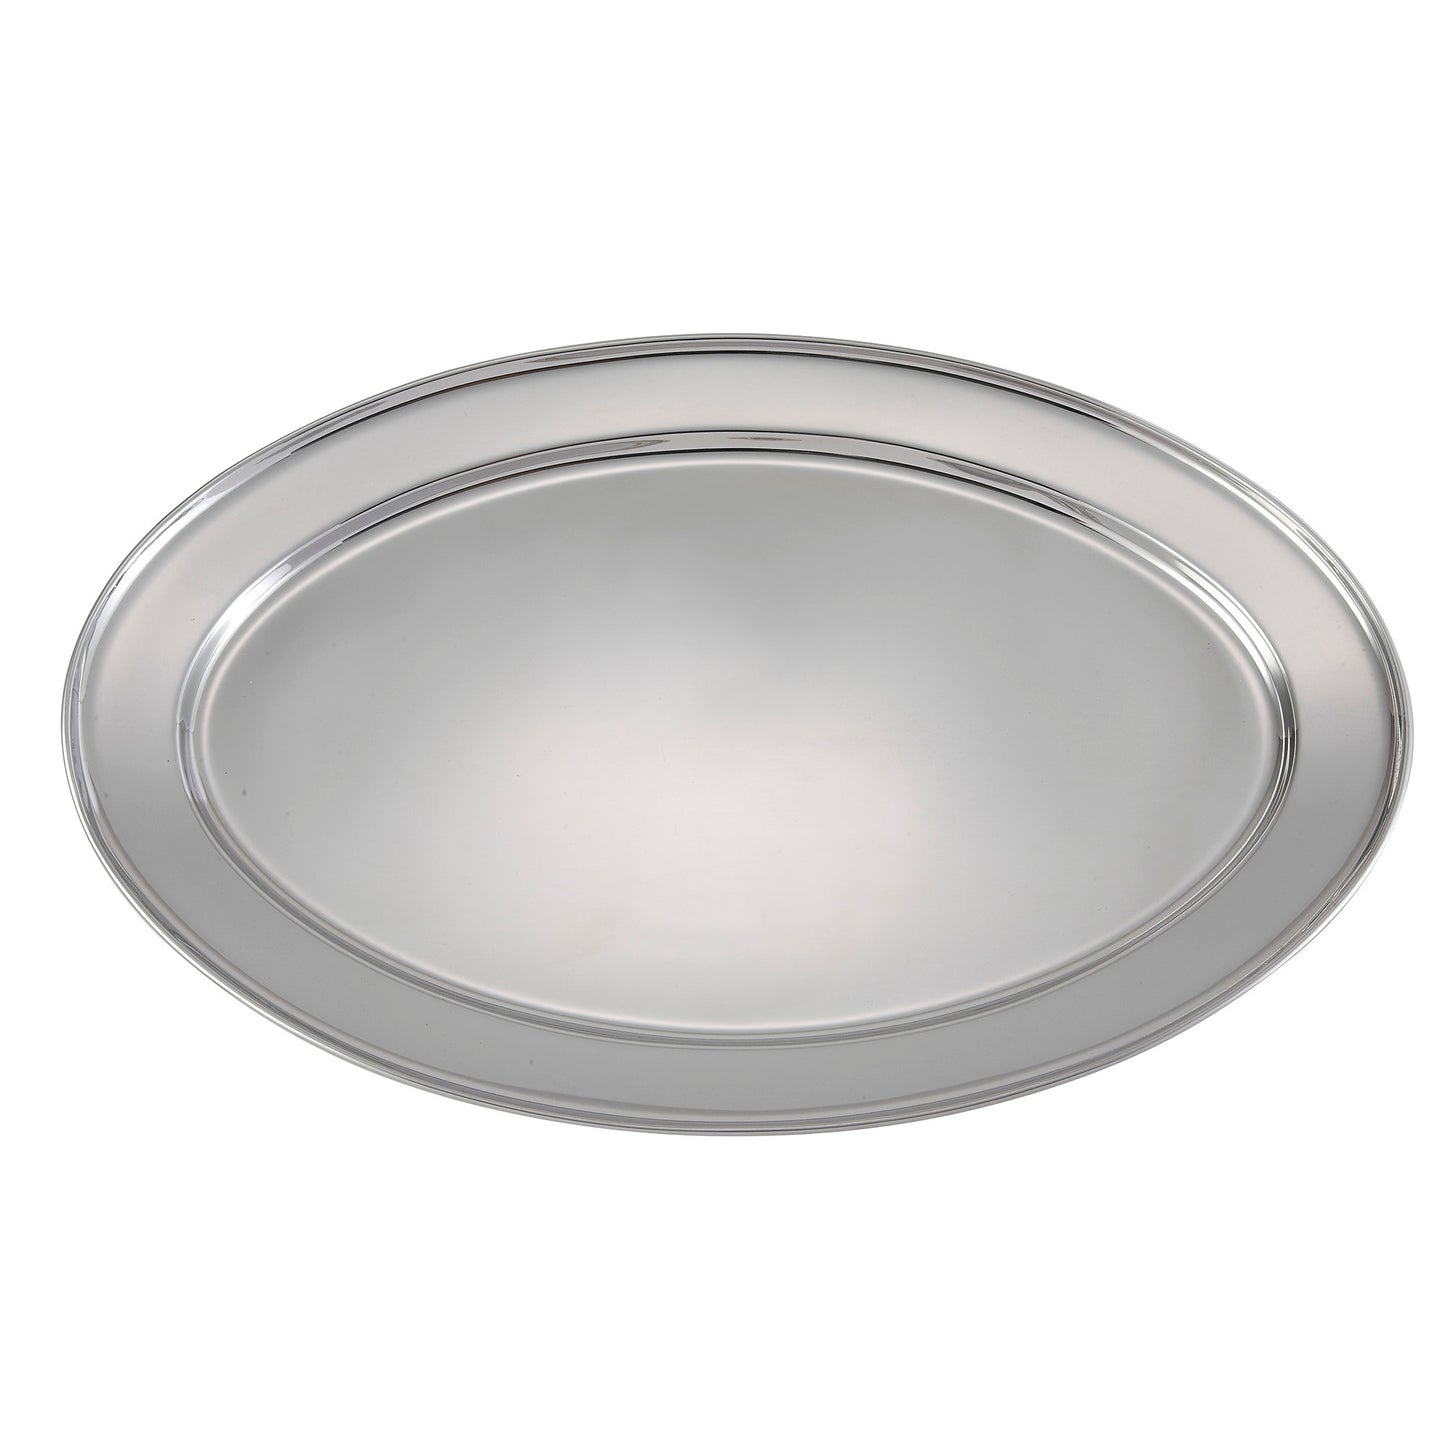 OPL-22 - Oval Platter, Stainless Steel - 21-3/4"